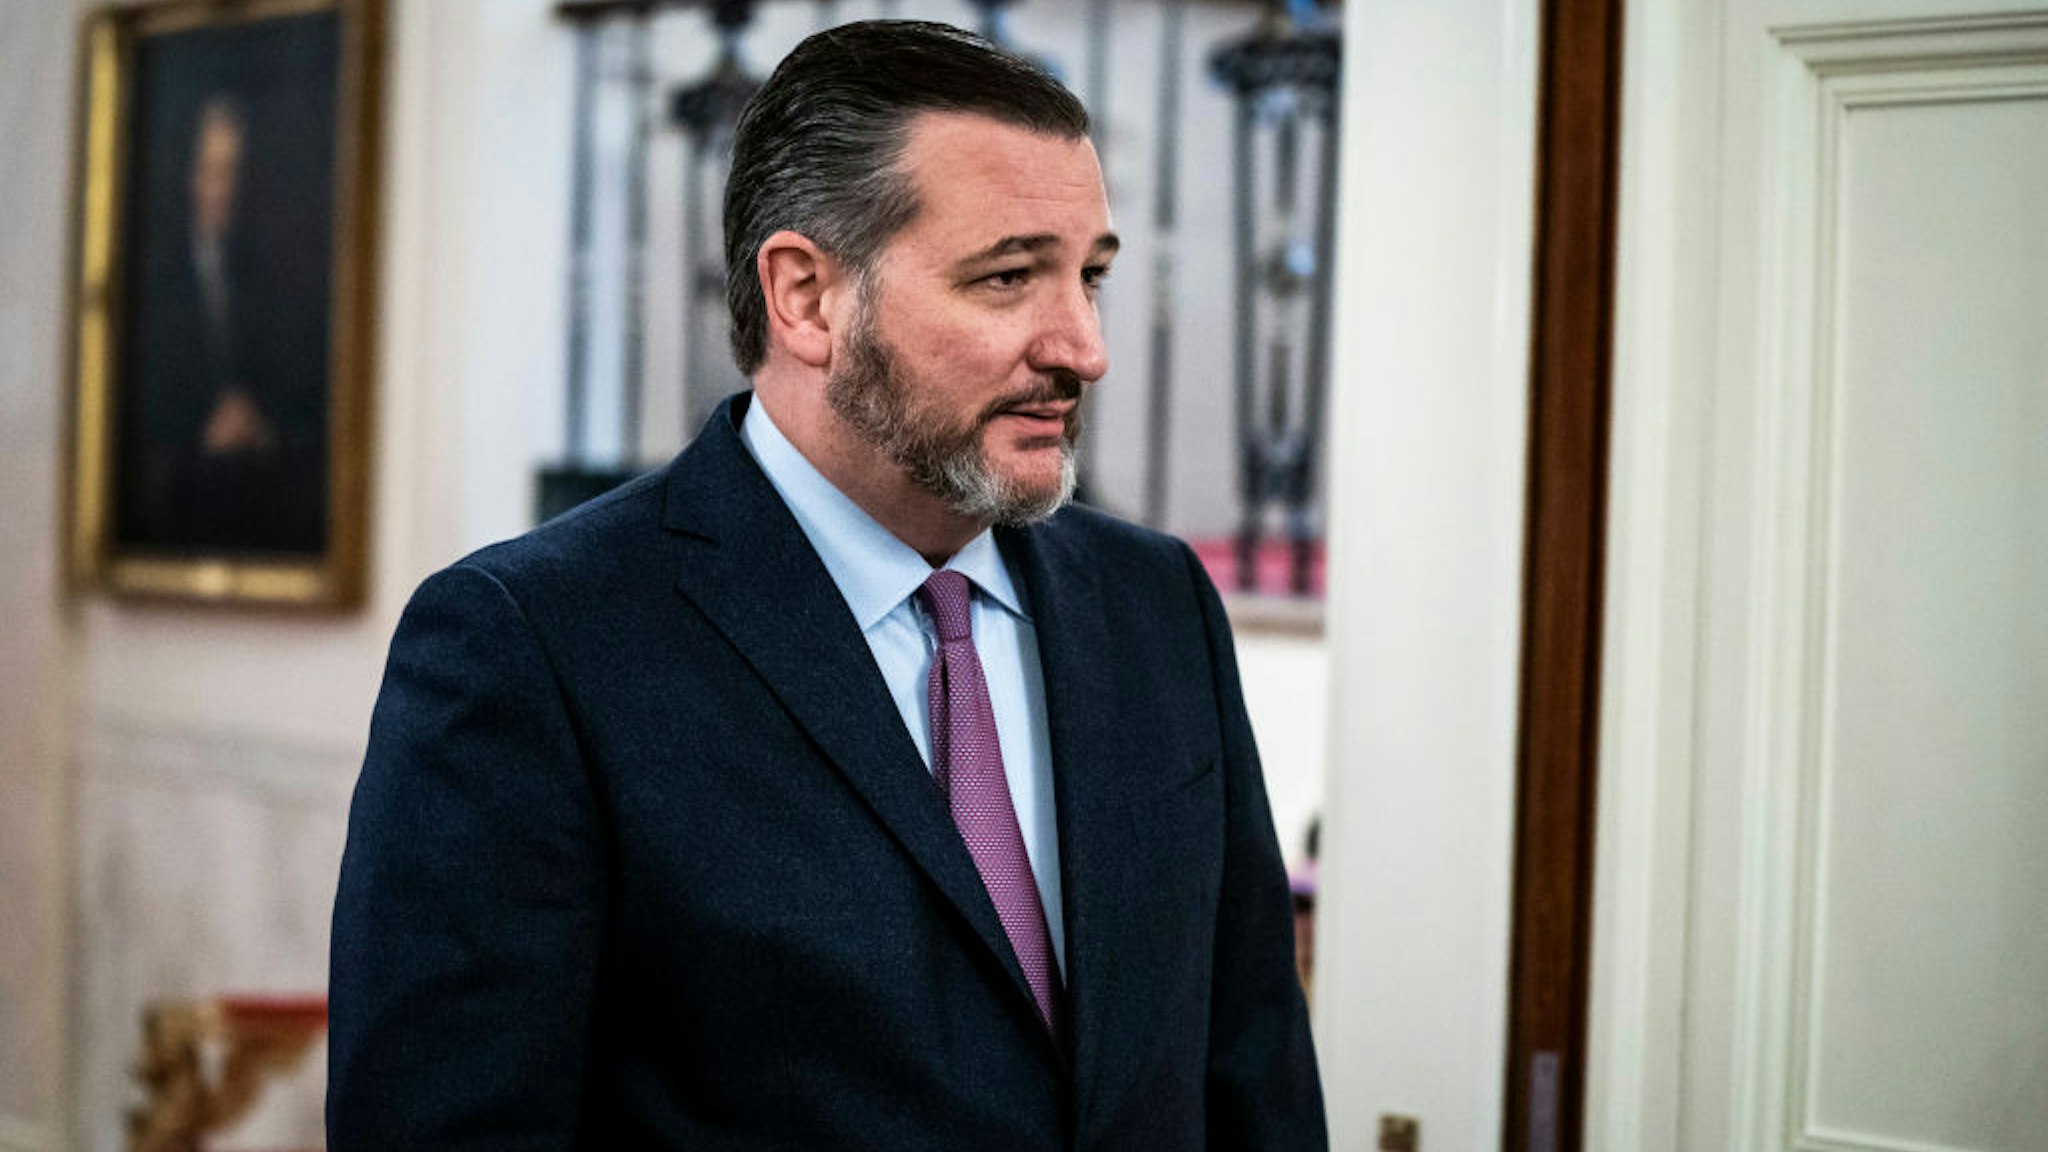 Sen. Ted Cruz, R-Texas, arrives moments before President Donald J. Trump and Prime Minister of the State of Israel Benjamin Netanyahu arrive to announce a long-awaited Israeli-Palestinian peace package in the East Room at the White House on Tuesday, Jan 28, 2020 in Washington, DC.